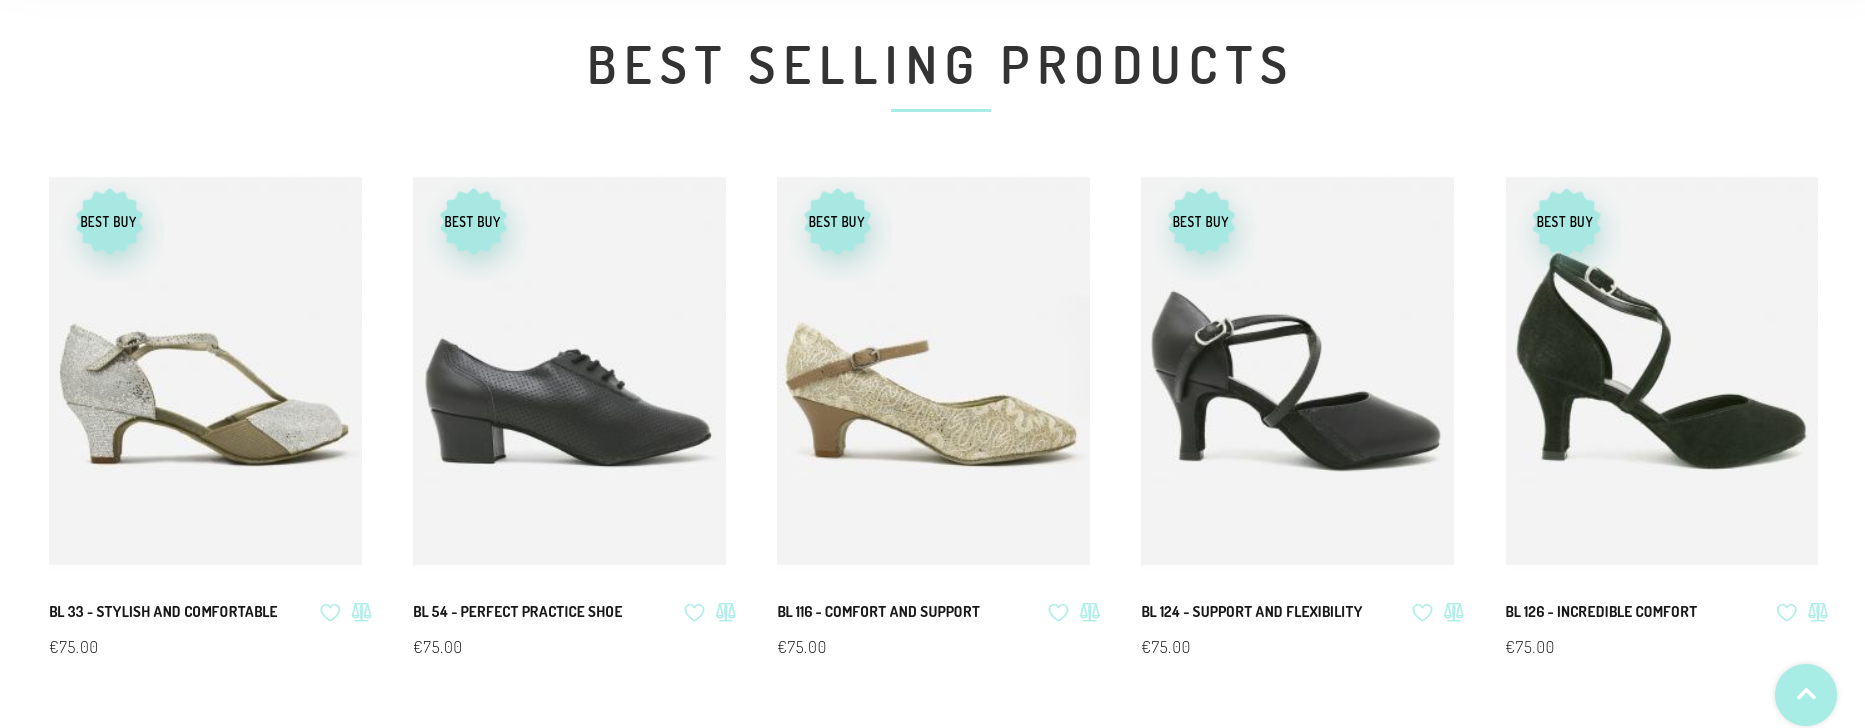 Best Selling Products - Social Proof